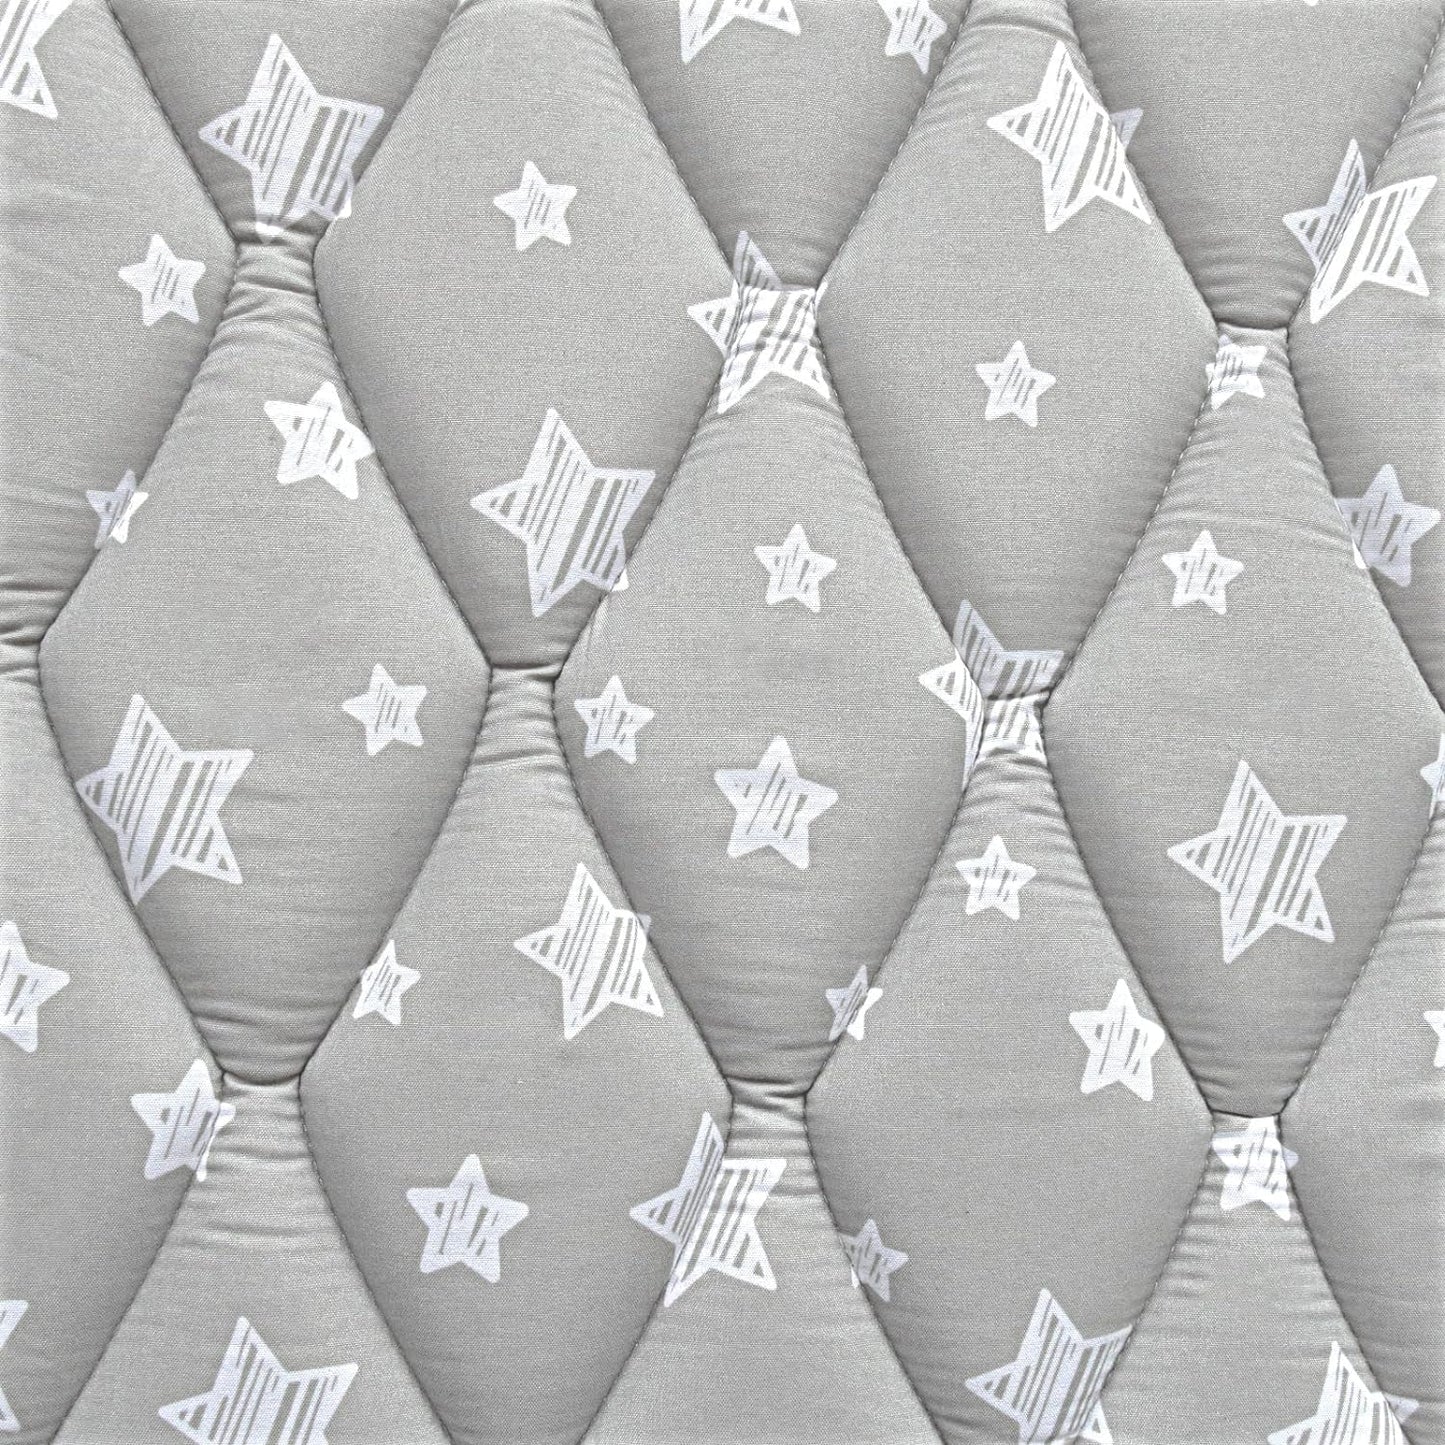 Premium Foam Baby Play Mat | Playpen Mat - 72" x 59", Thicker and Non-Toxic Crawling Mat for Infant & Toddler, Grey Star